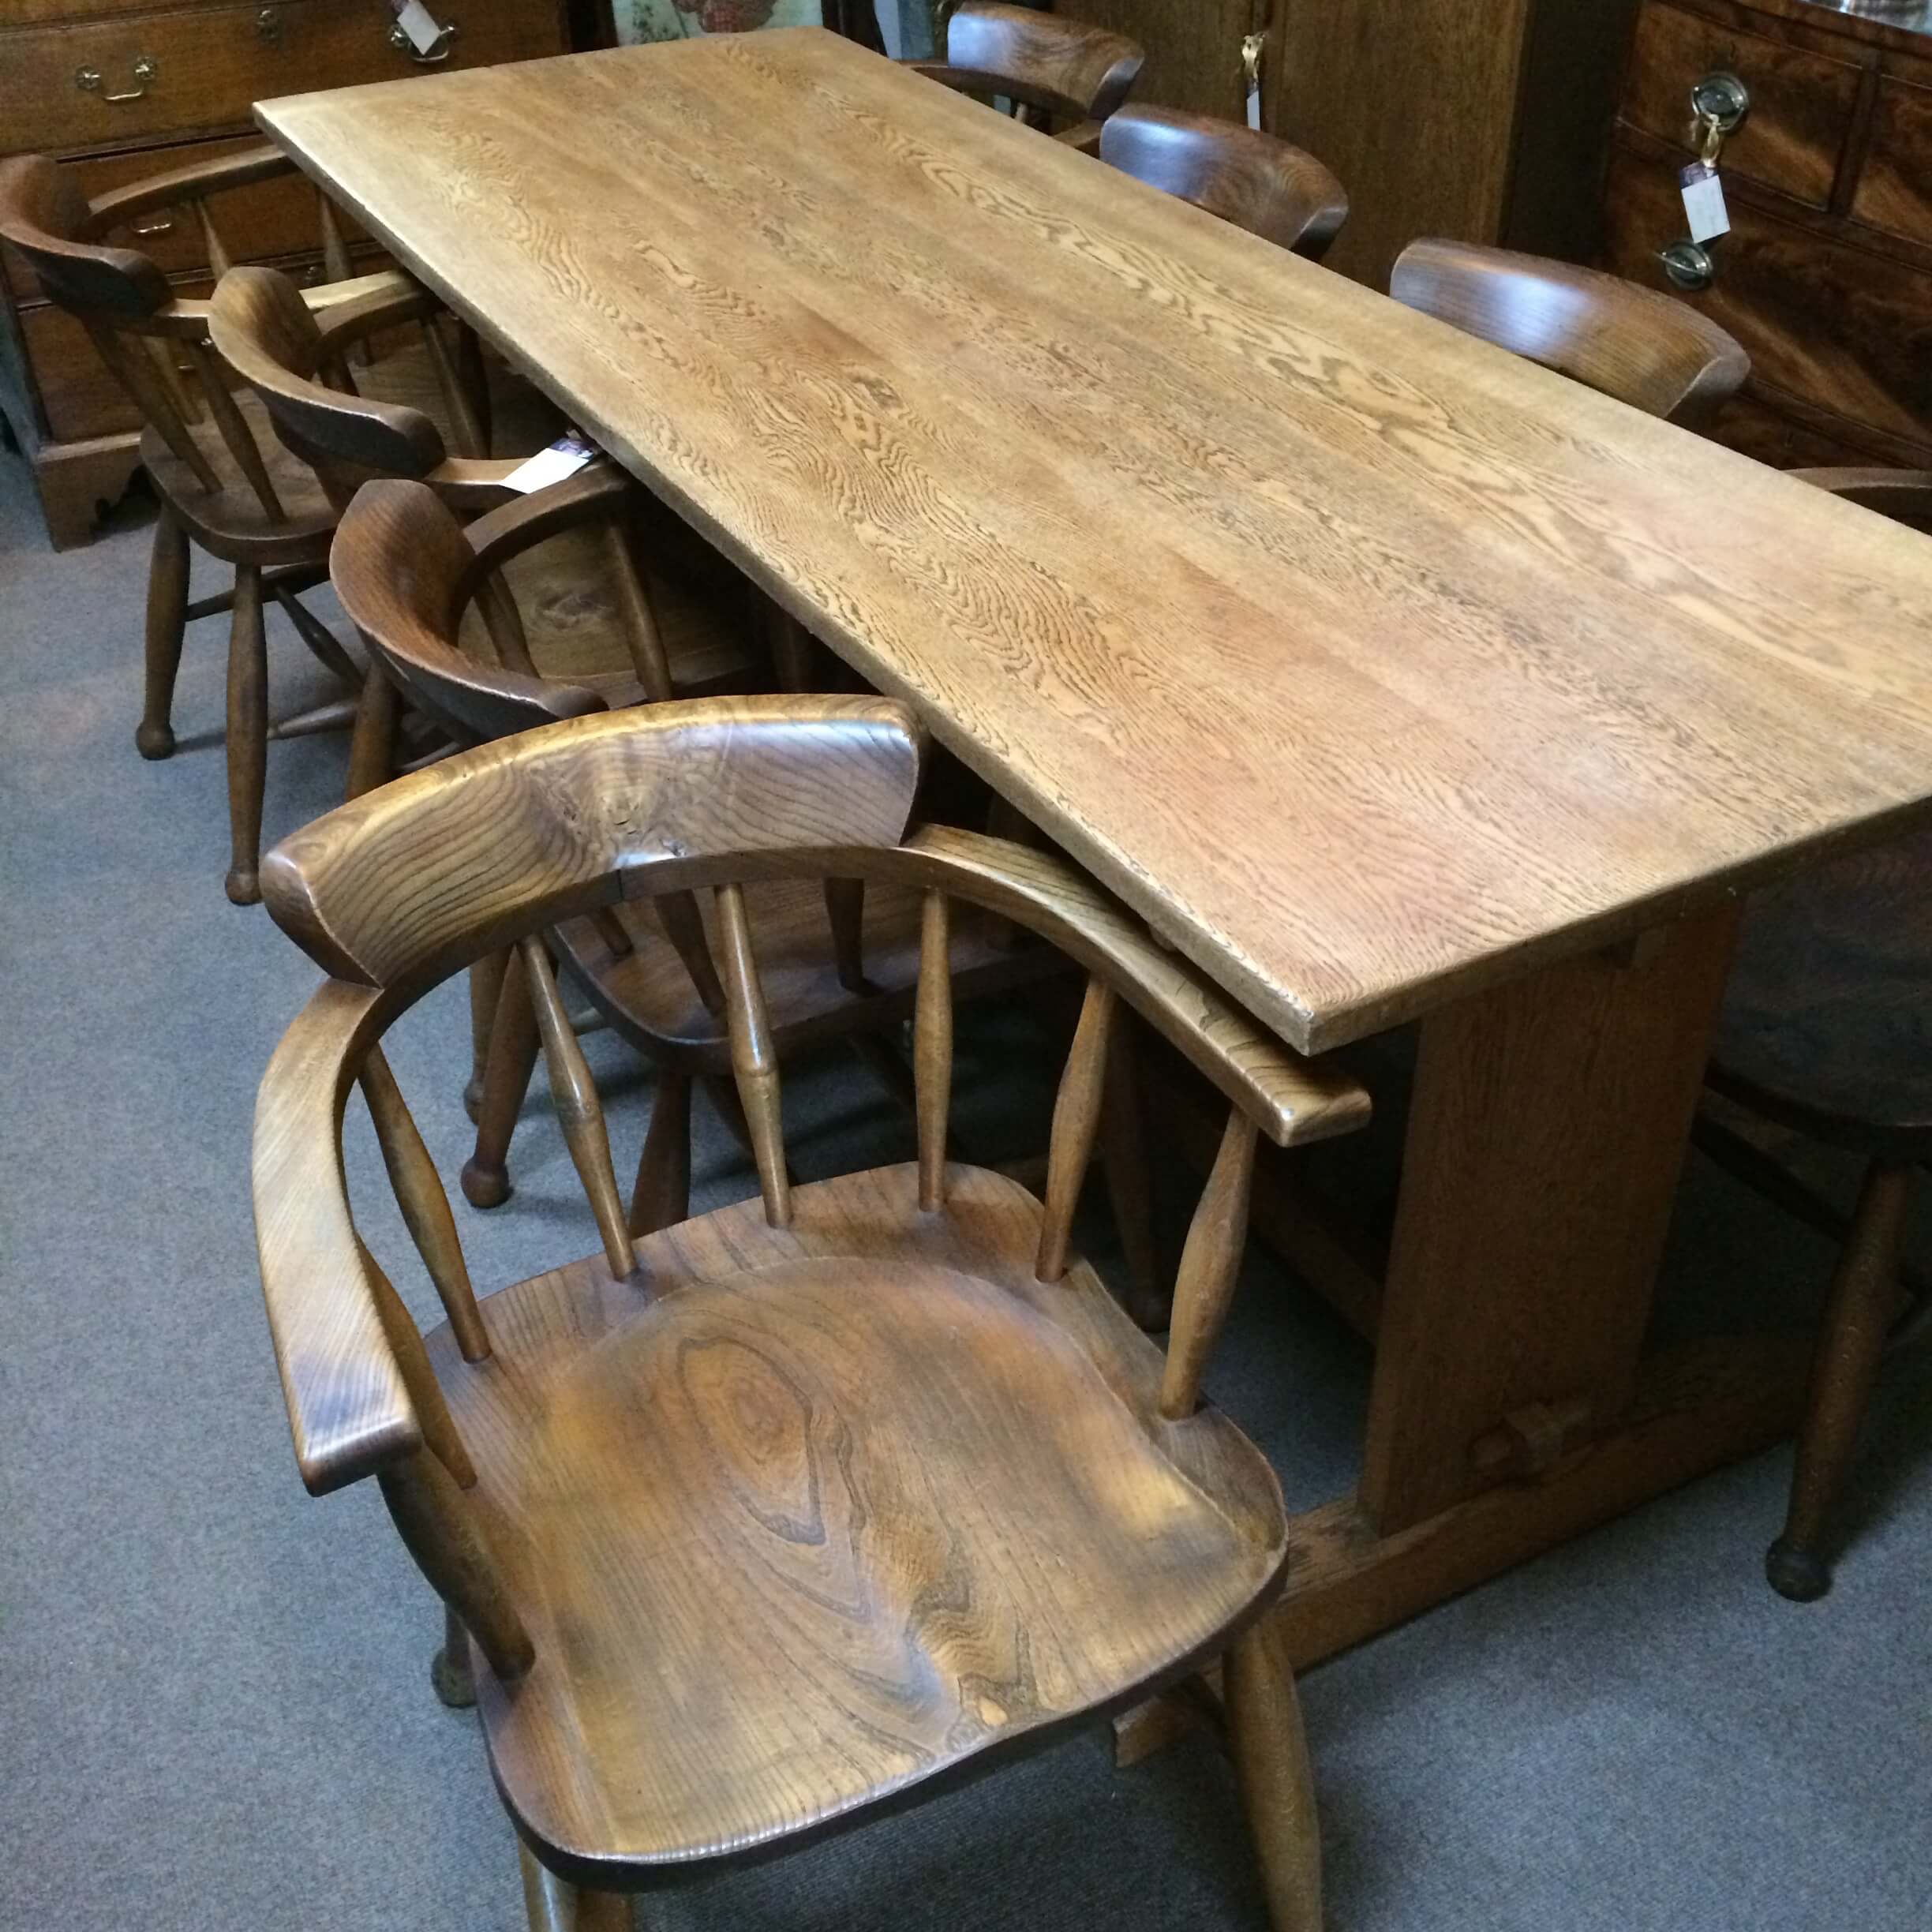 Refectory Table and Chairs